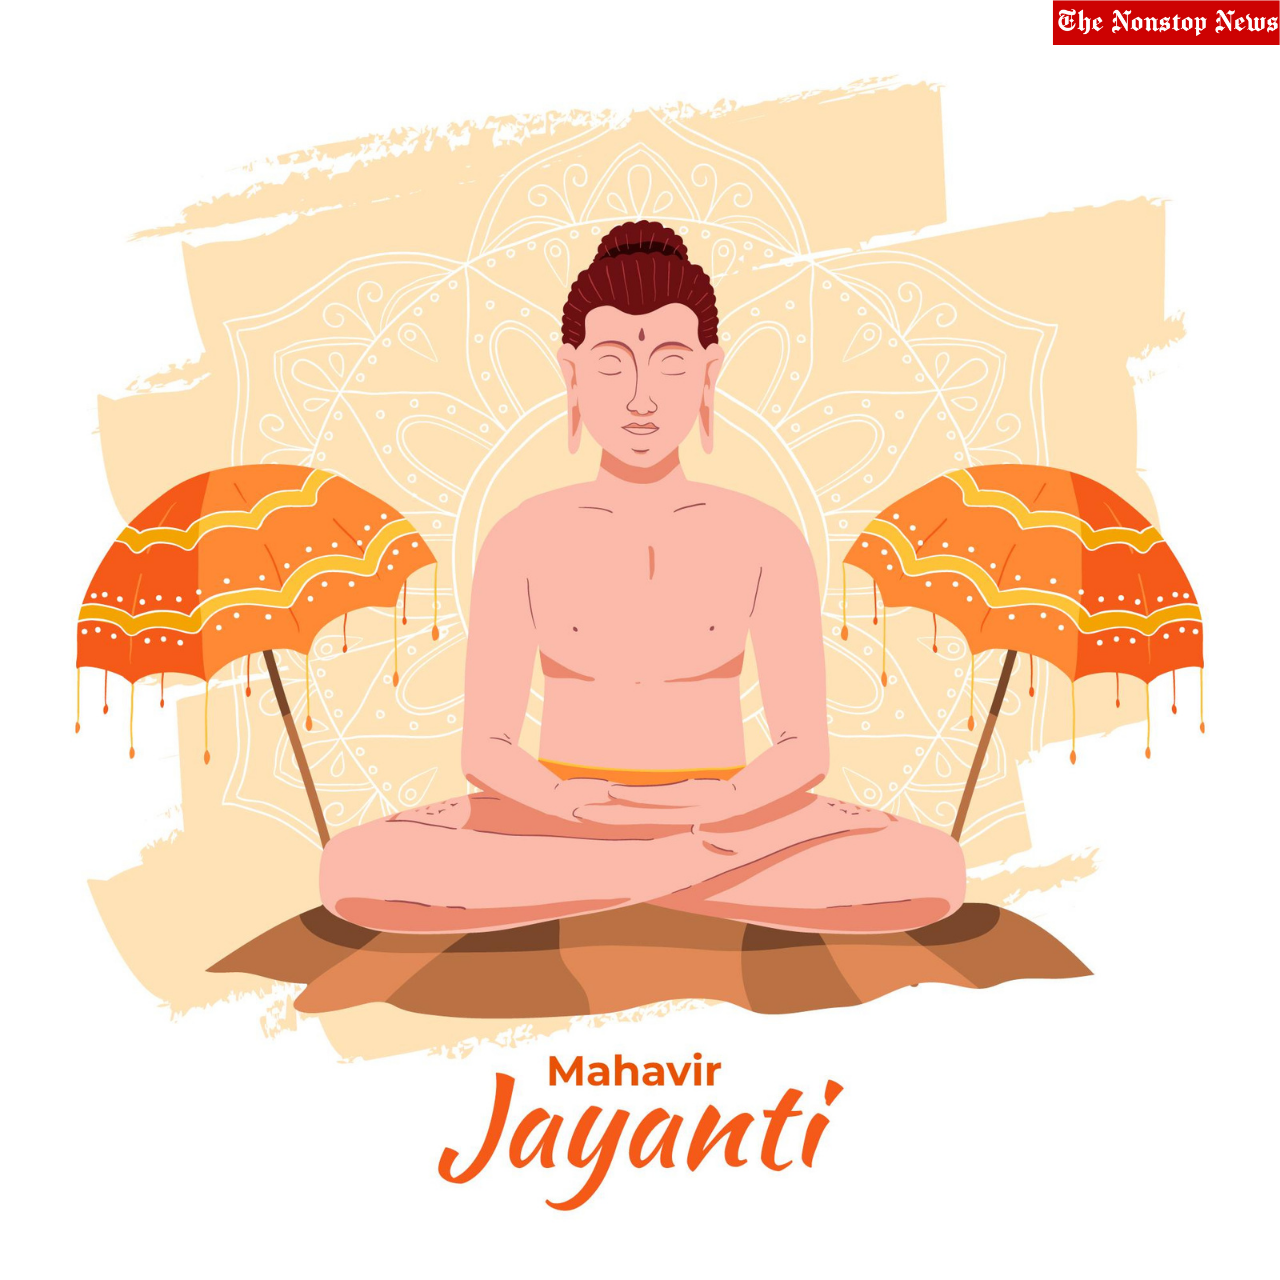 Happy Mahavir Jayanti 2022: Best Instagram Captions, Facebook Messages, Twitter Quotes, Pinterest Images, Posters, Banners To Share